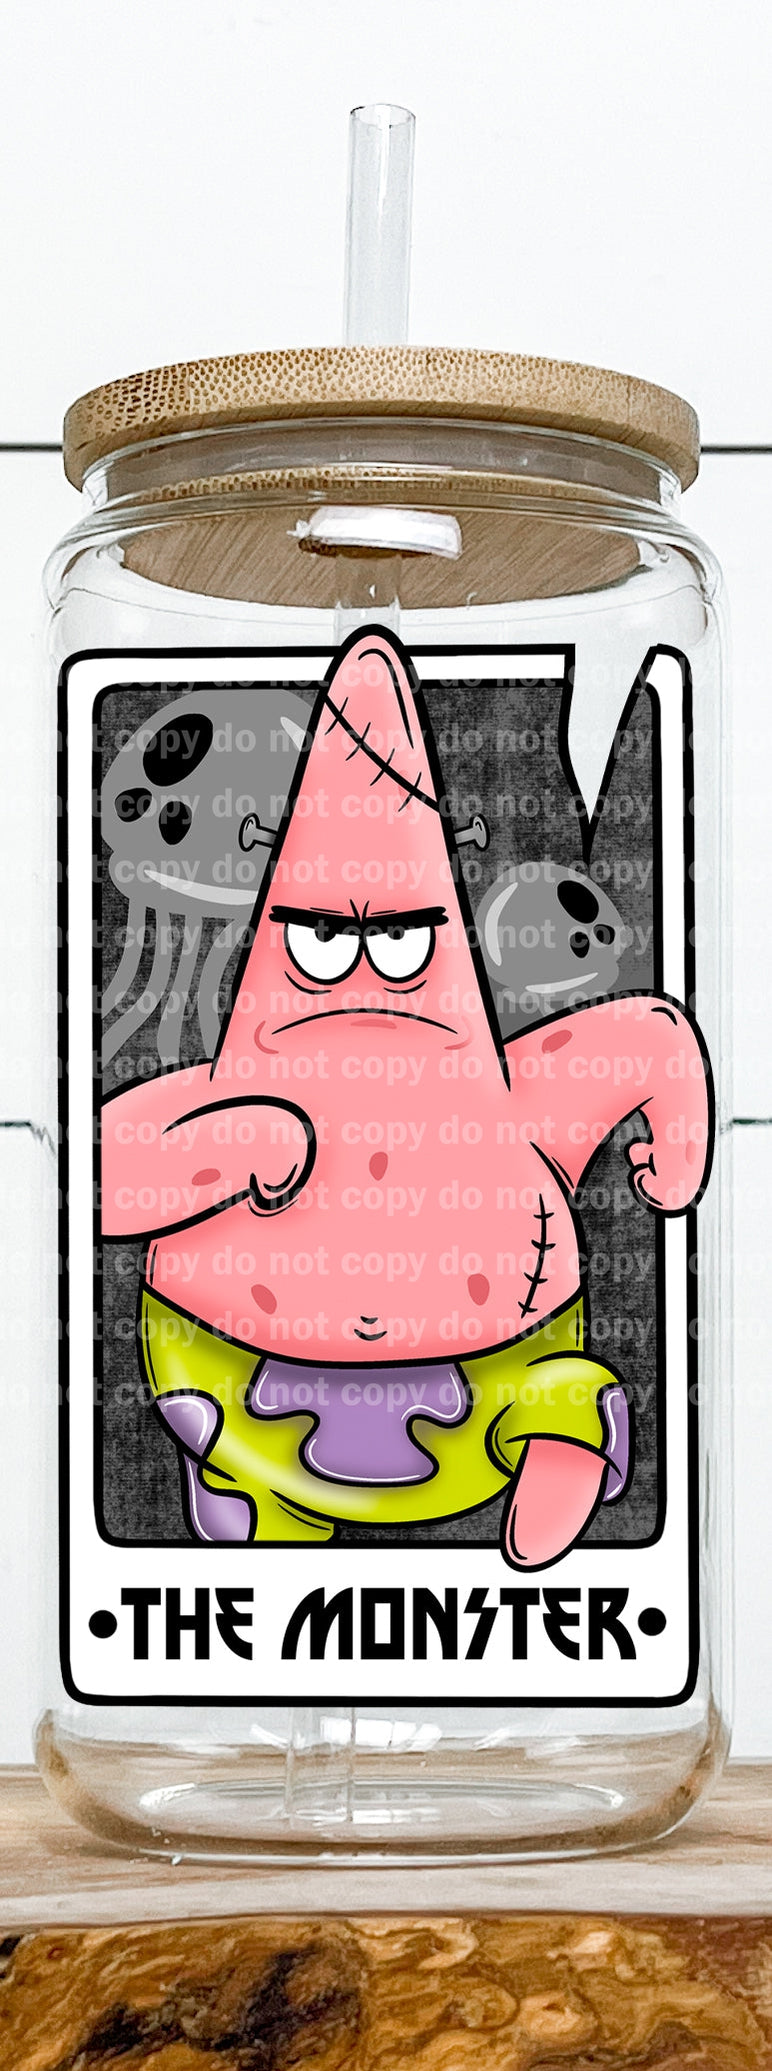 The Monster Card Decal 2.7 x 4.5